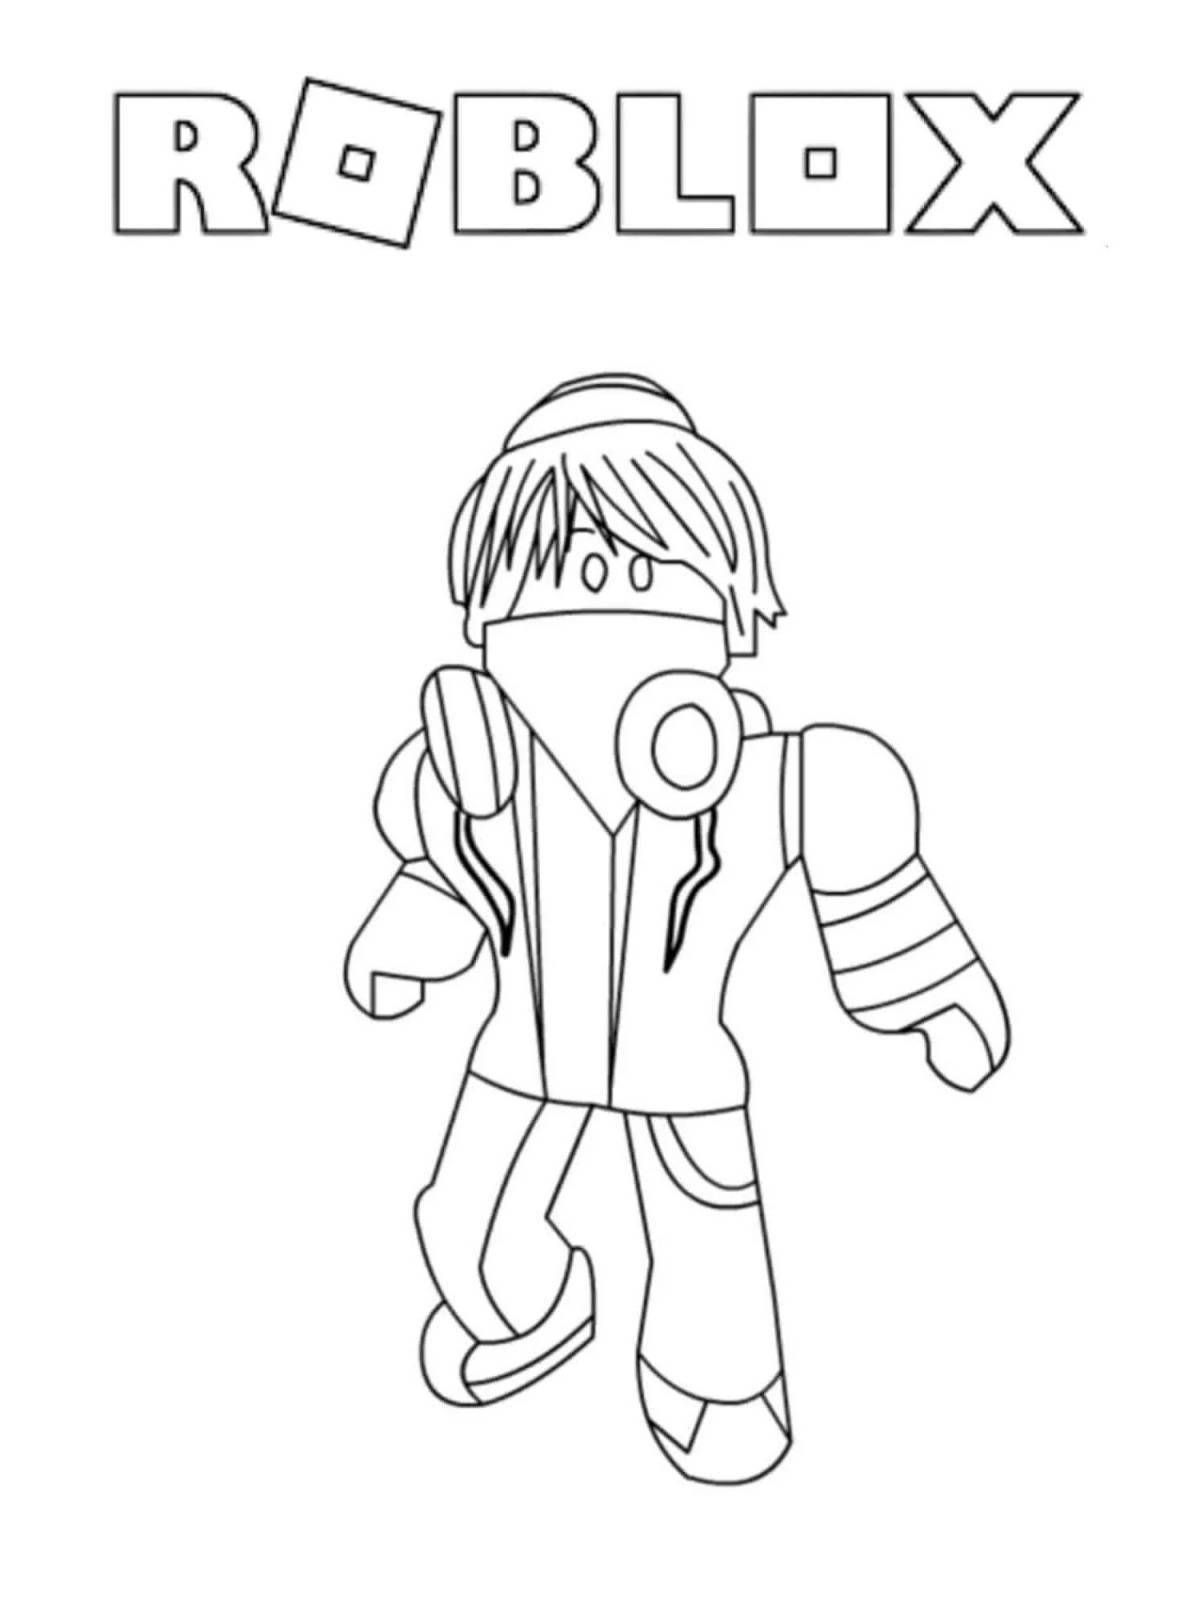 Roblox glowing coloring page